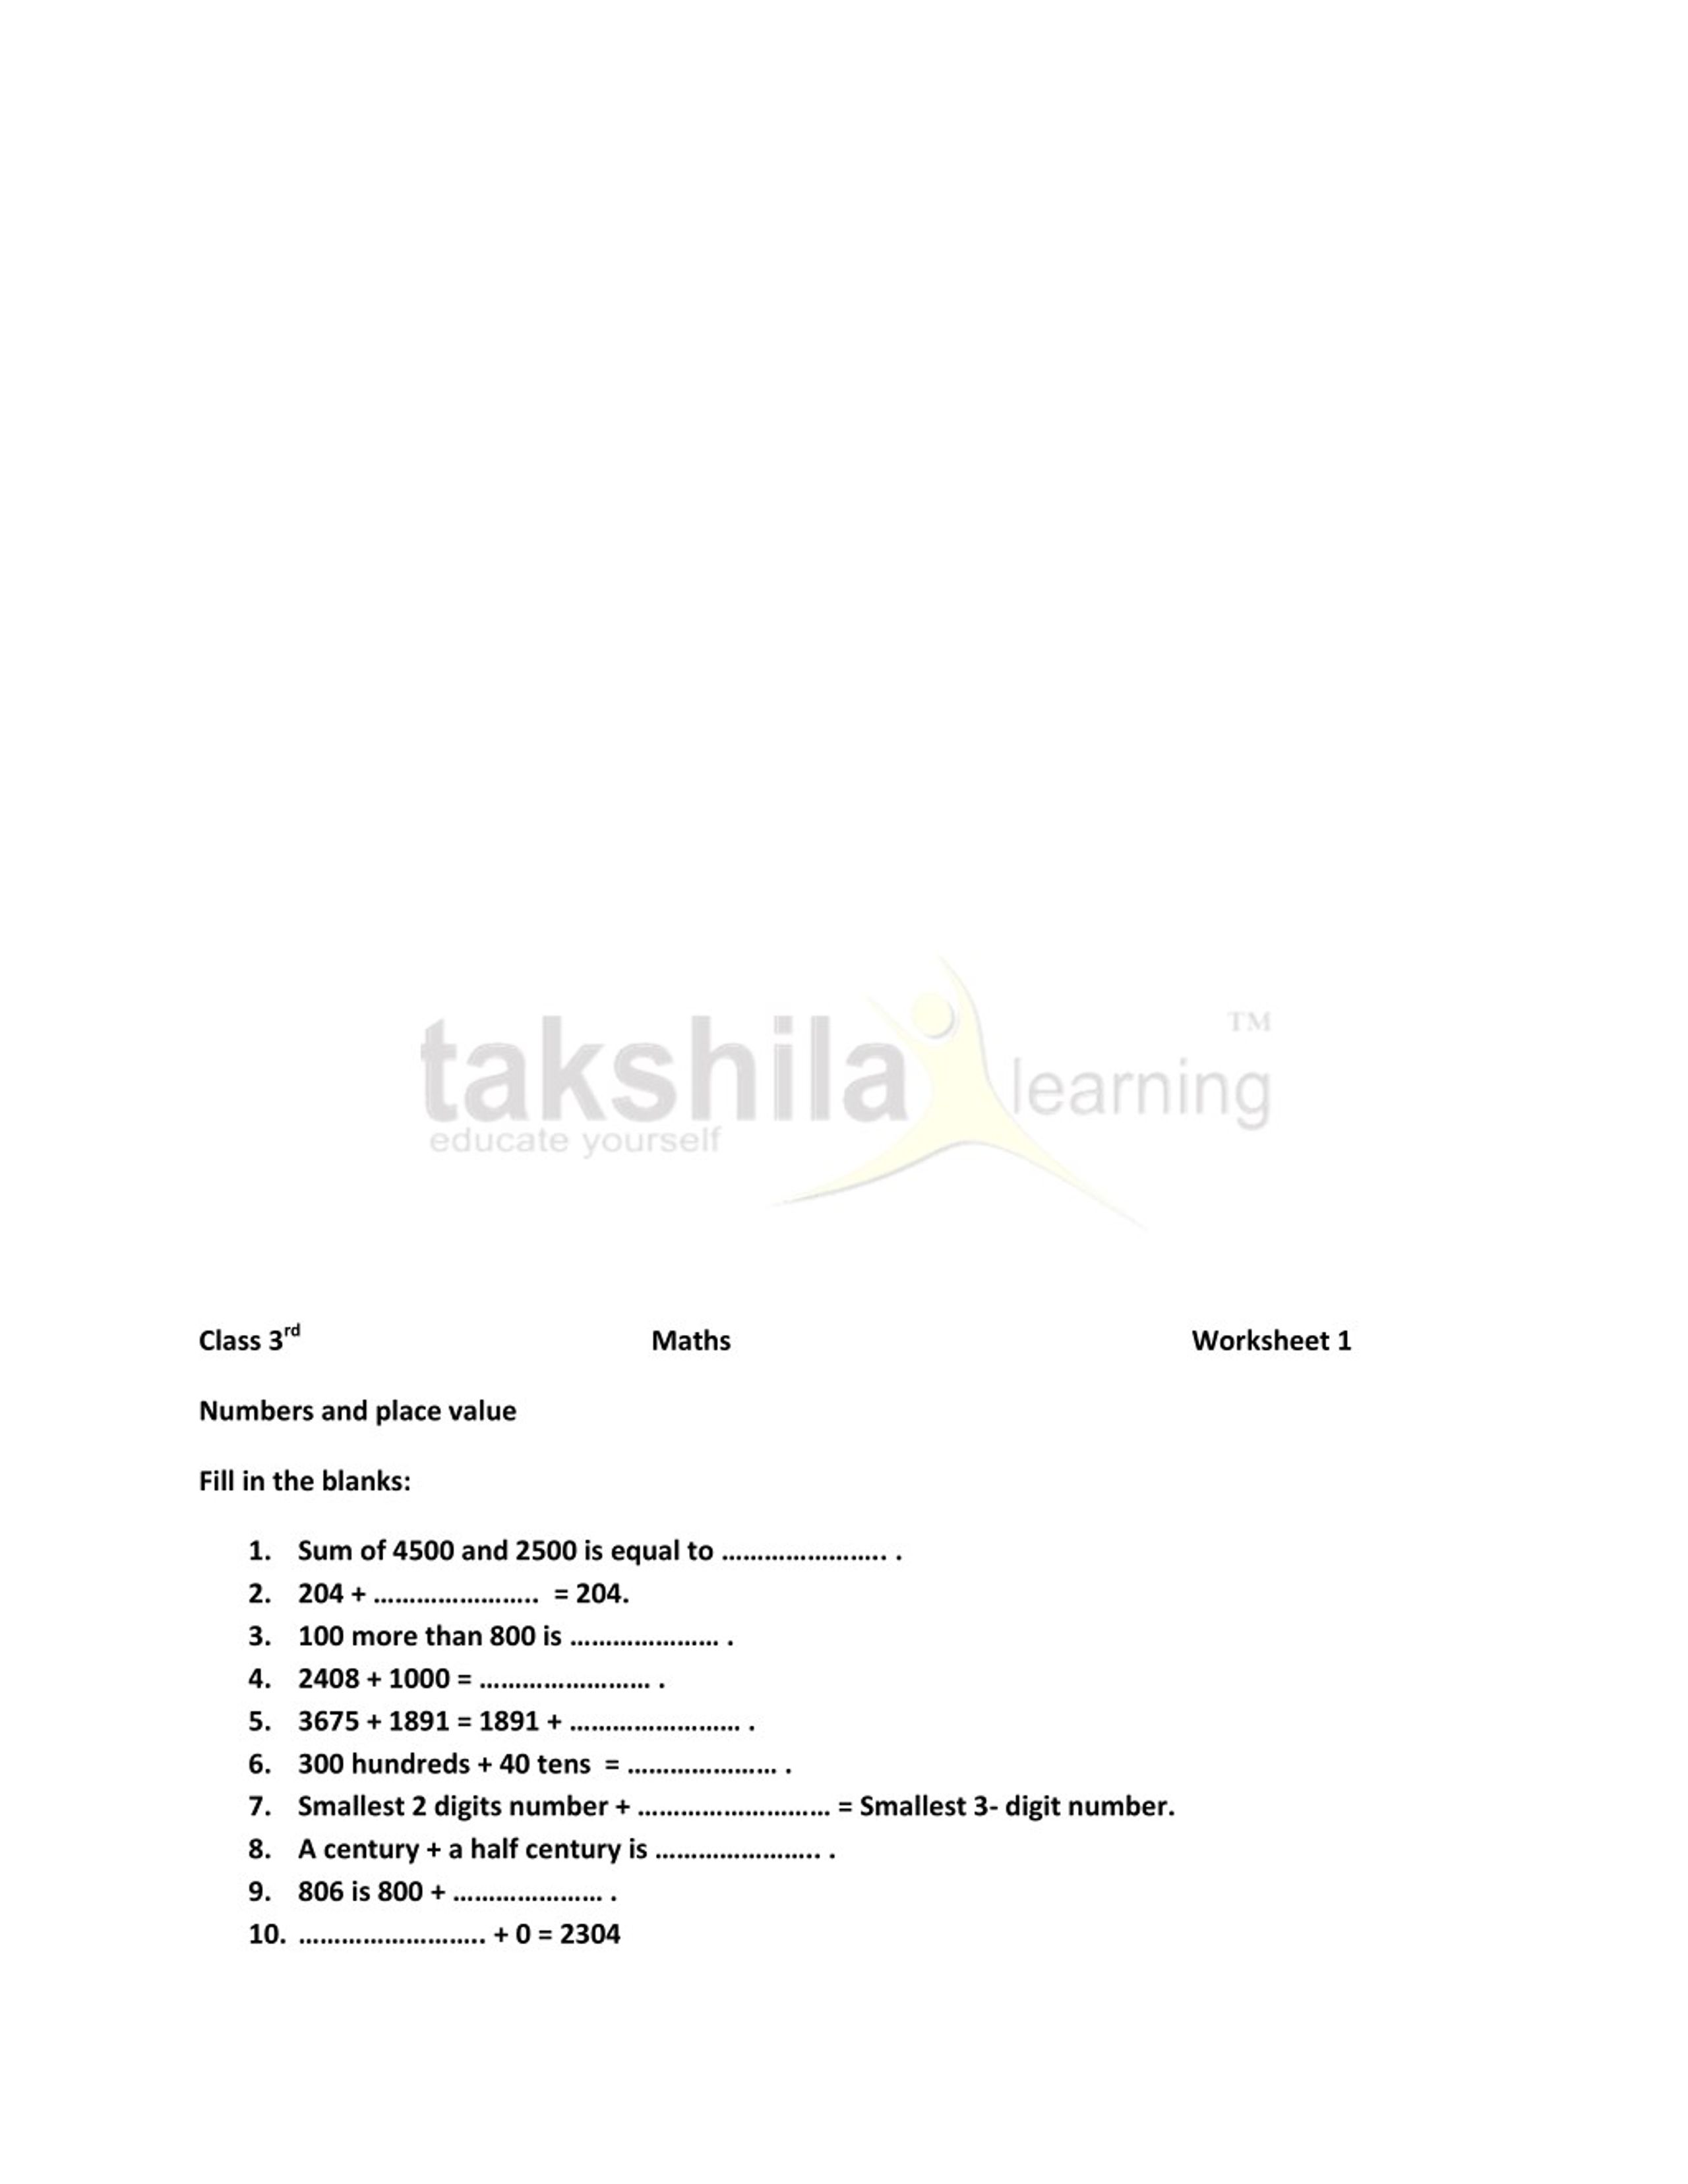 PPT - Practice Worksheet for Class 3 Maths - Numbers and ...